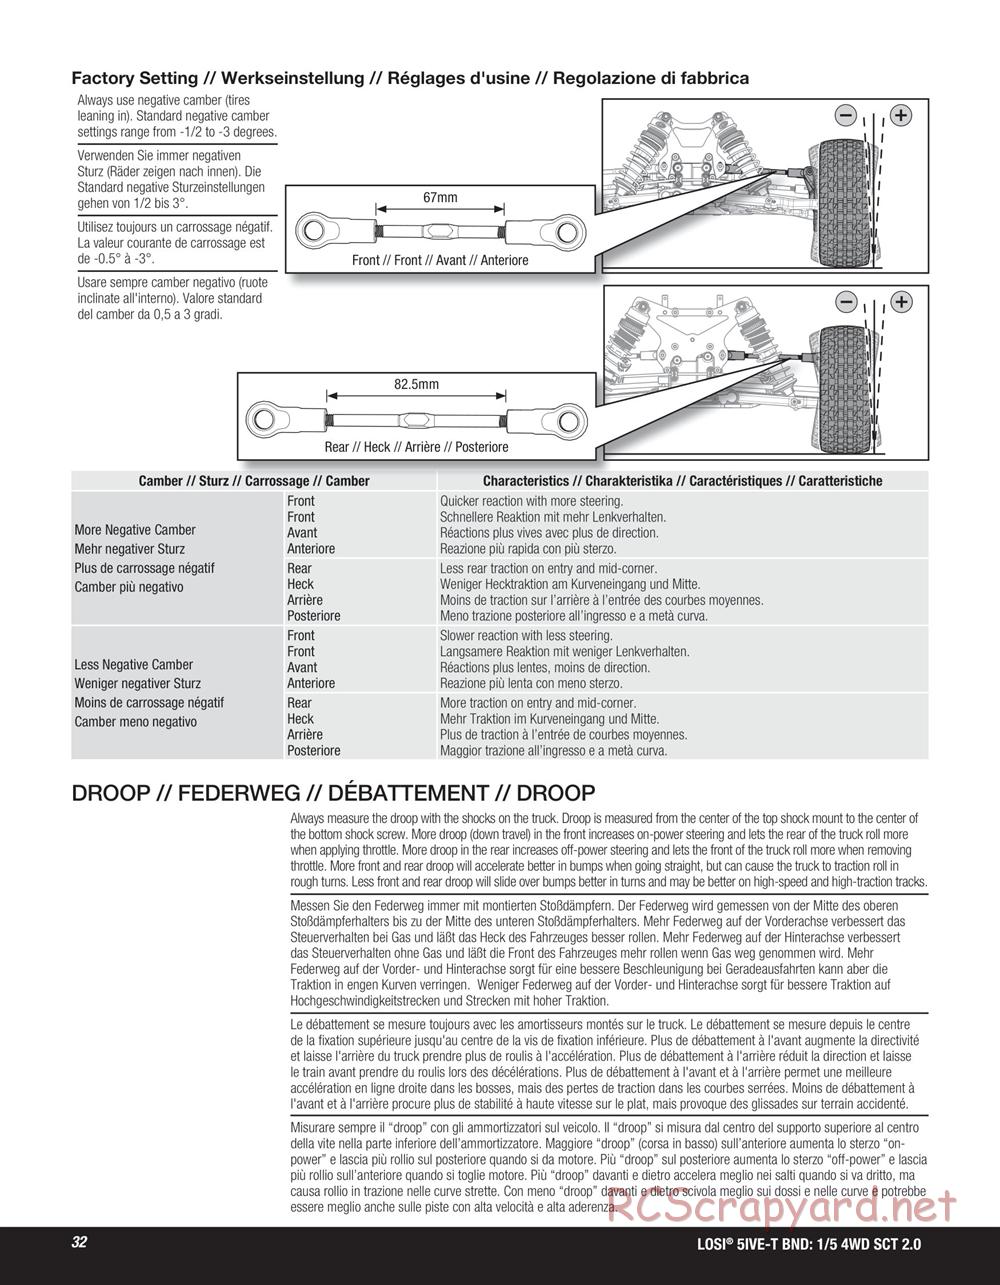 Team Losi - 5ive-T 2.0 SCT - Manual - Page 32